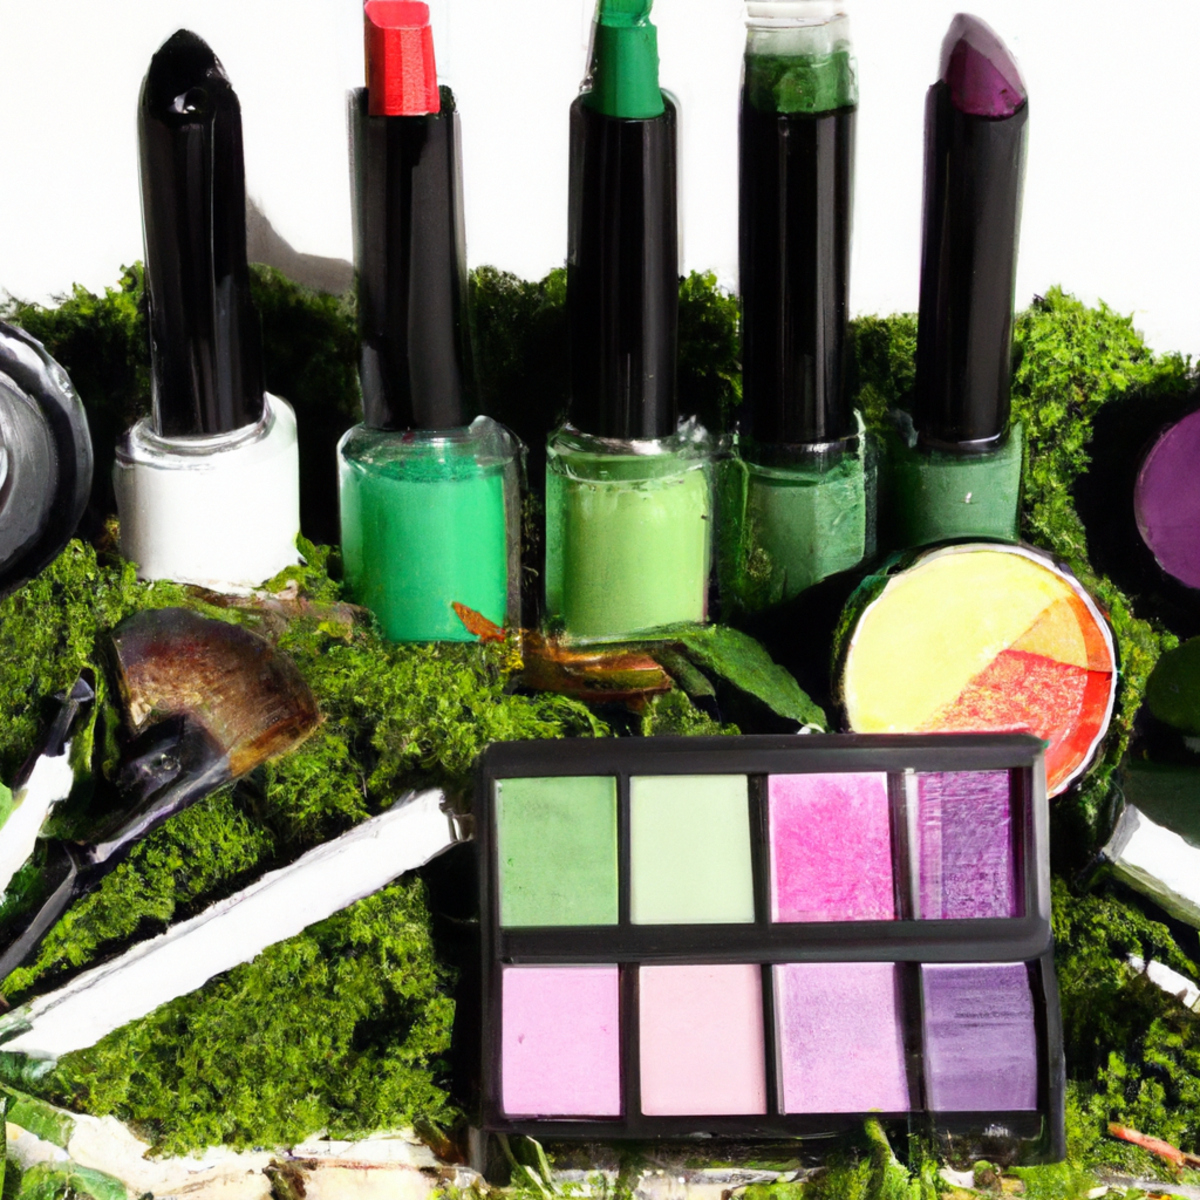 Earth-friendly cosmetics in vibrant colors and textures, showcasing organic lipsticks, cruelty-free eyeshadow palettes, and eco-friendly makeup brushes.